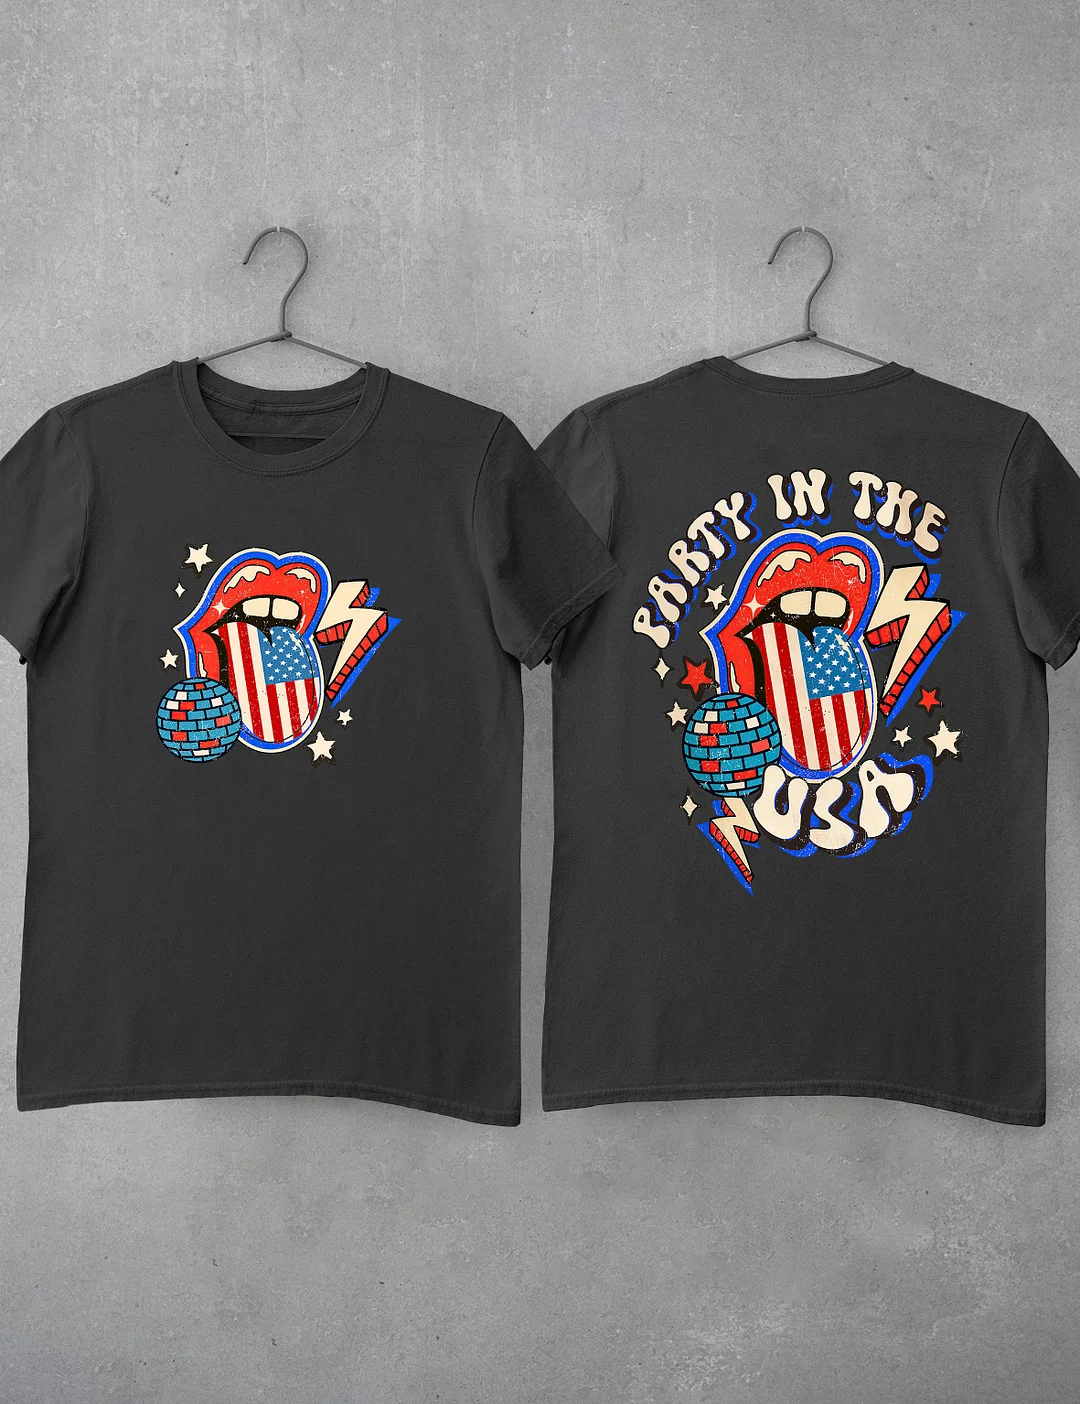 Retro Party in the USA T-shirt